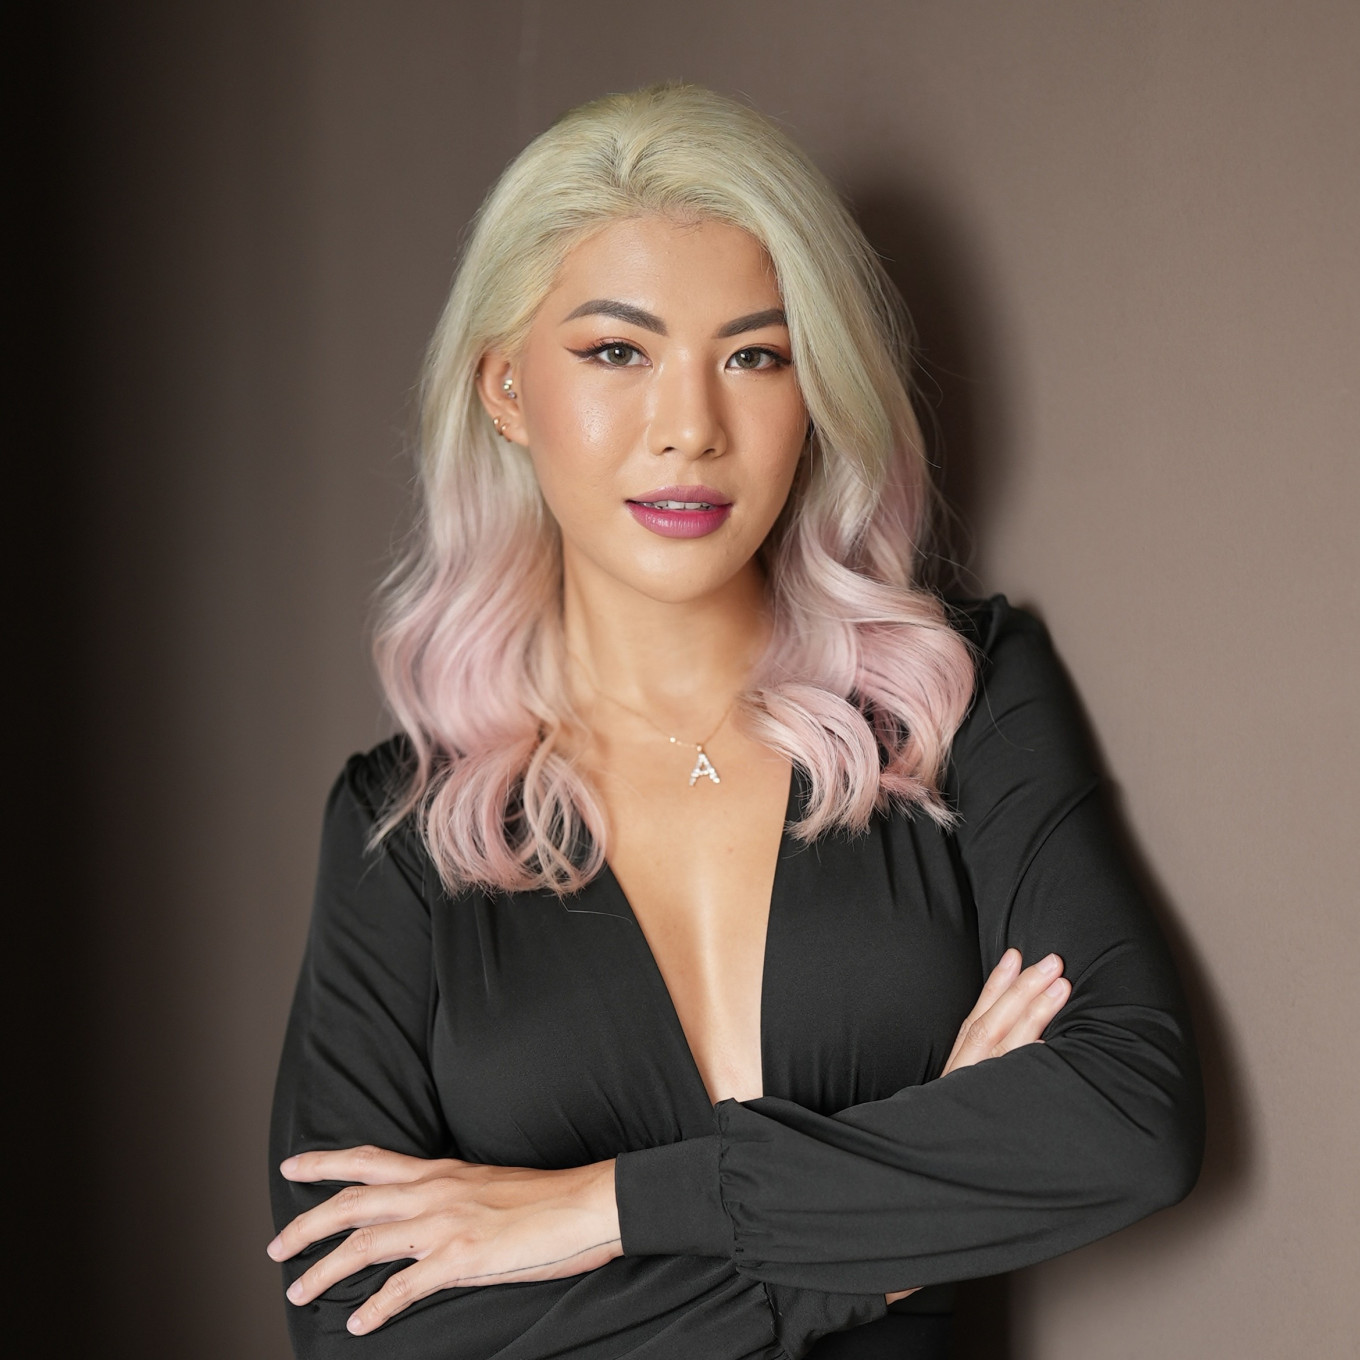 What Ive Learned Andrea Gunawan, sexual health content creator - People